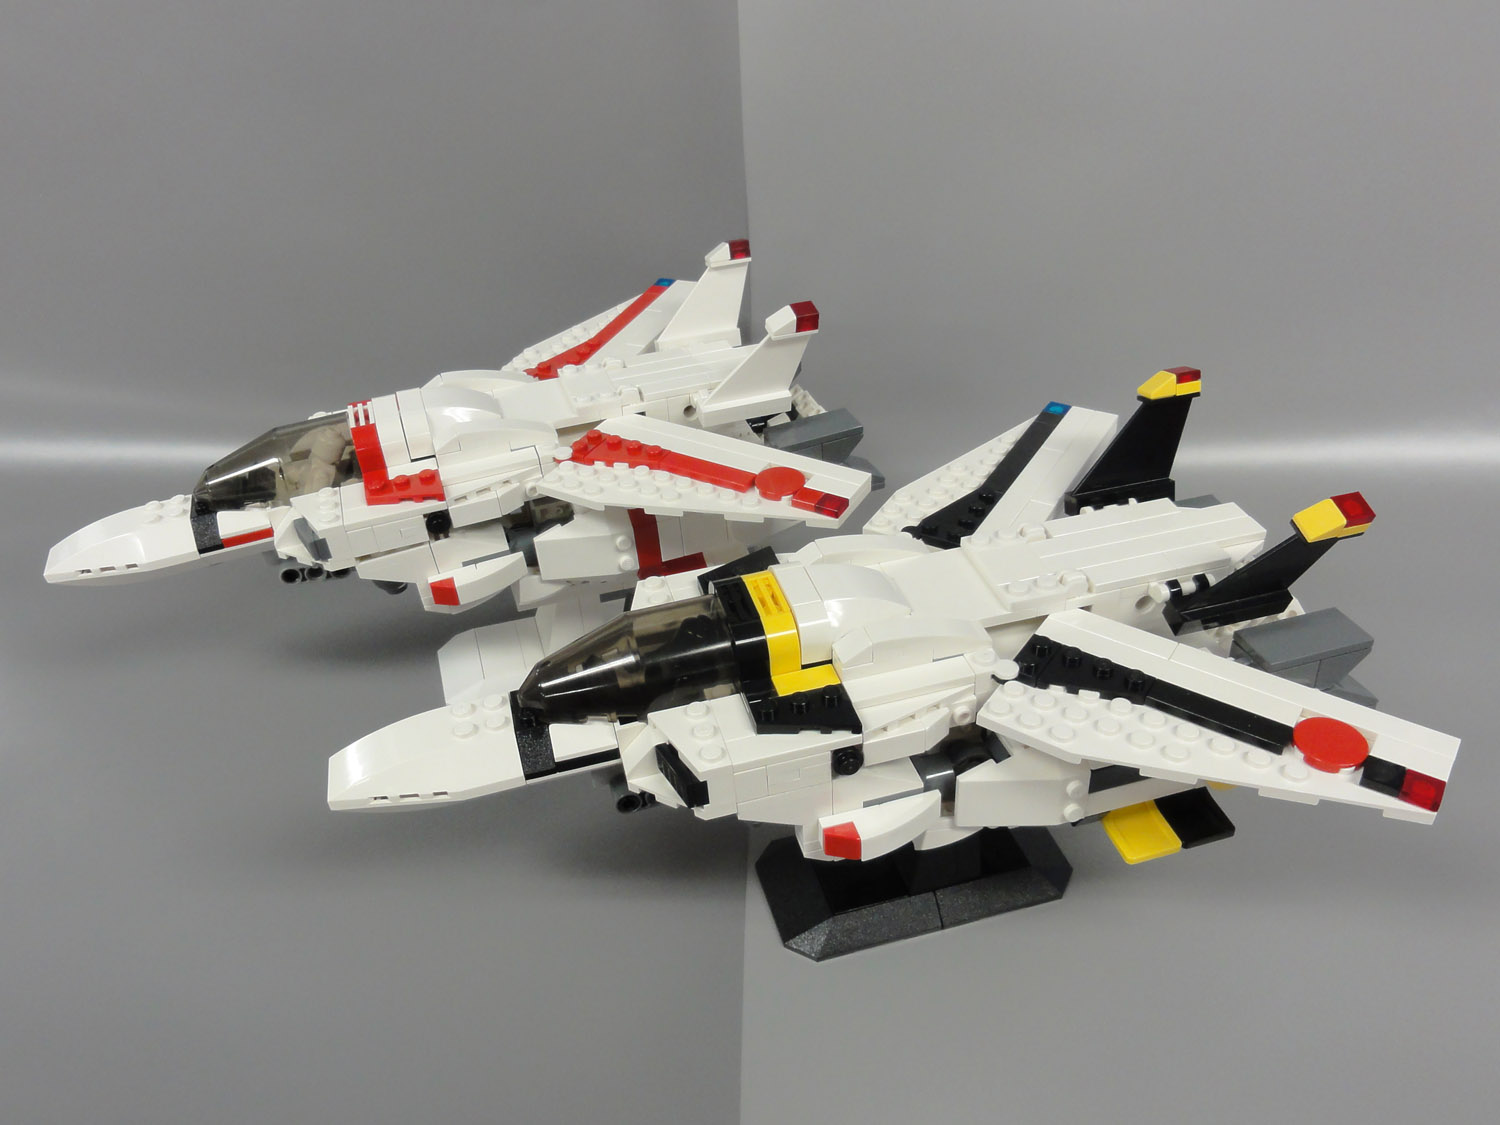 two lego fighter jets are set next to each other